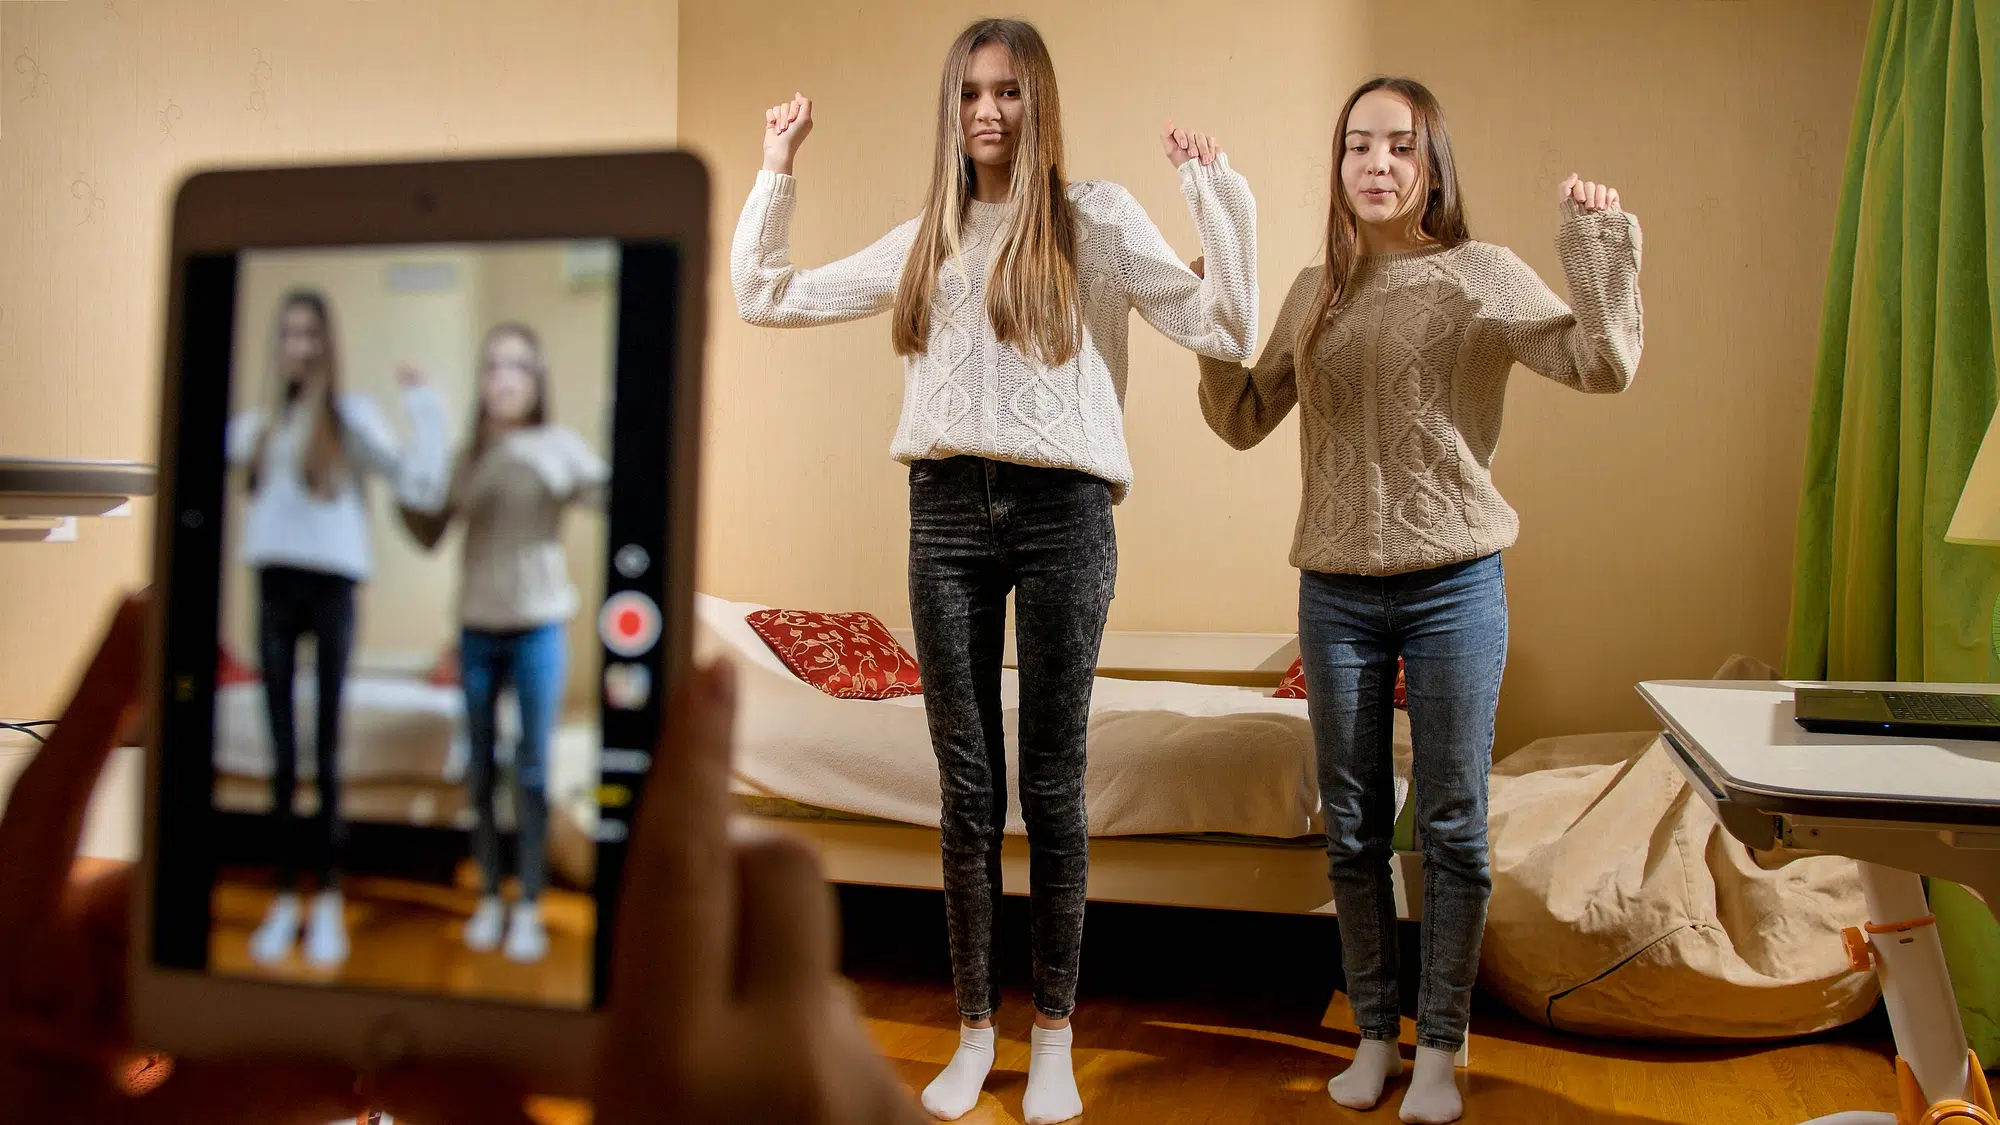 REcording video on smartphone of two teenage girls dancing for posting in internet. Modern communication, social media and gadgets.